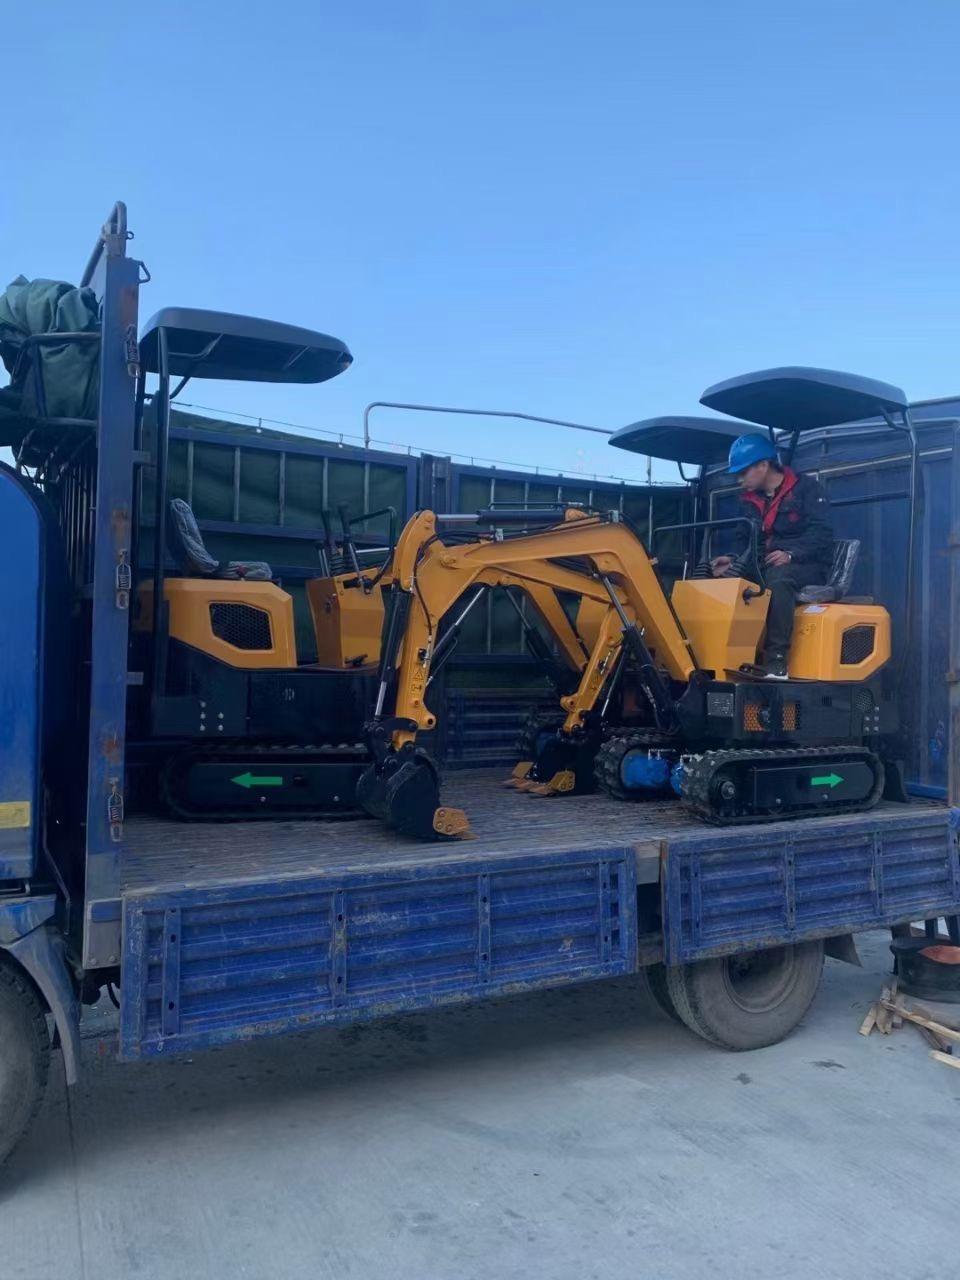 CE EPA Small Excavator Machine with Direct Factory